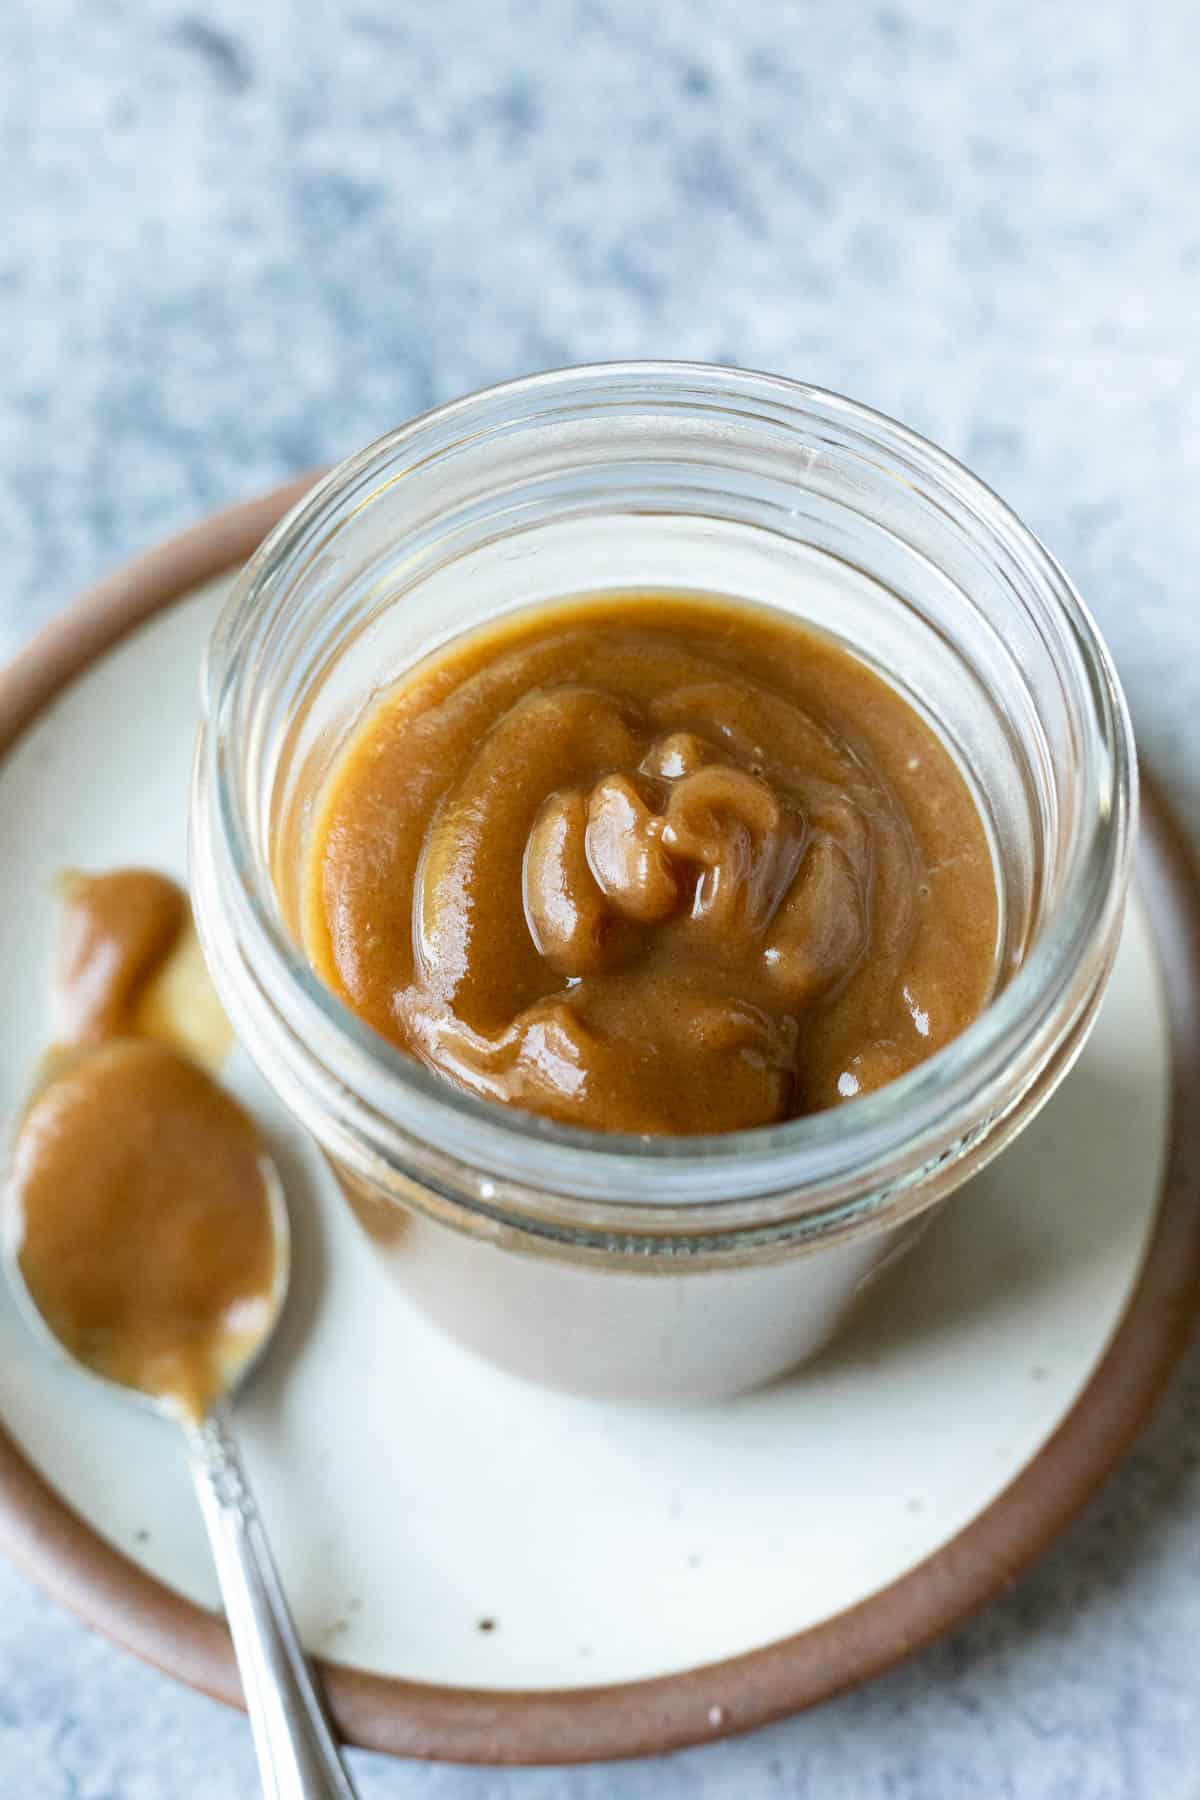 A spoon with date caramel sauce on it resting beside a full jar.